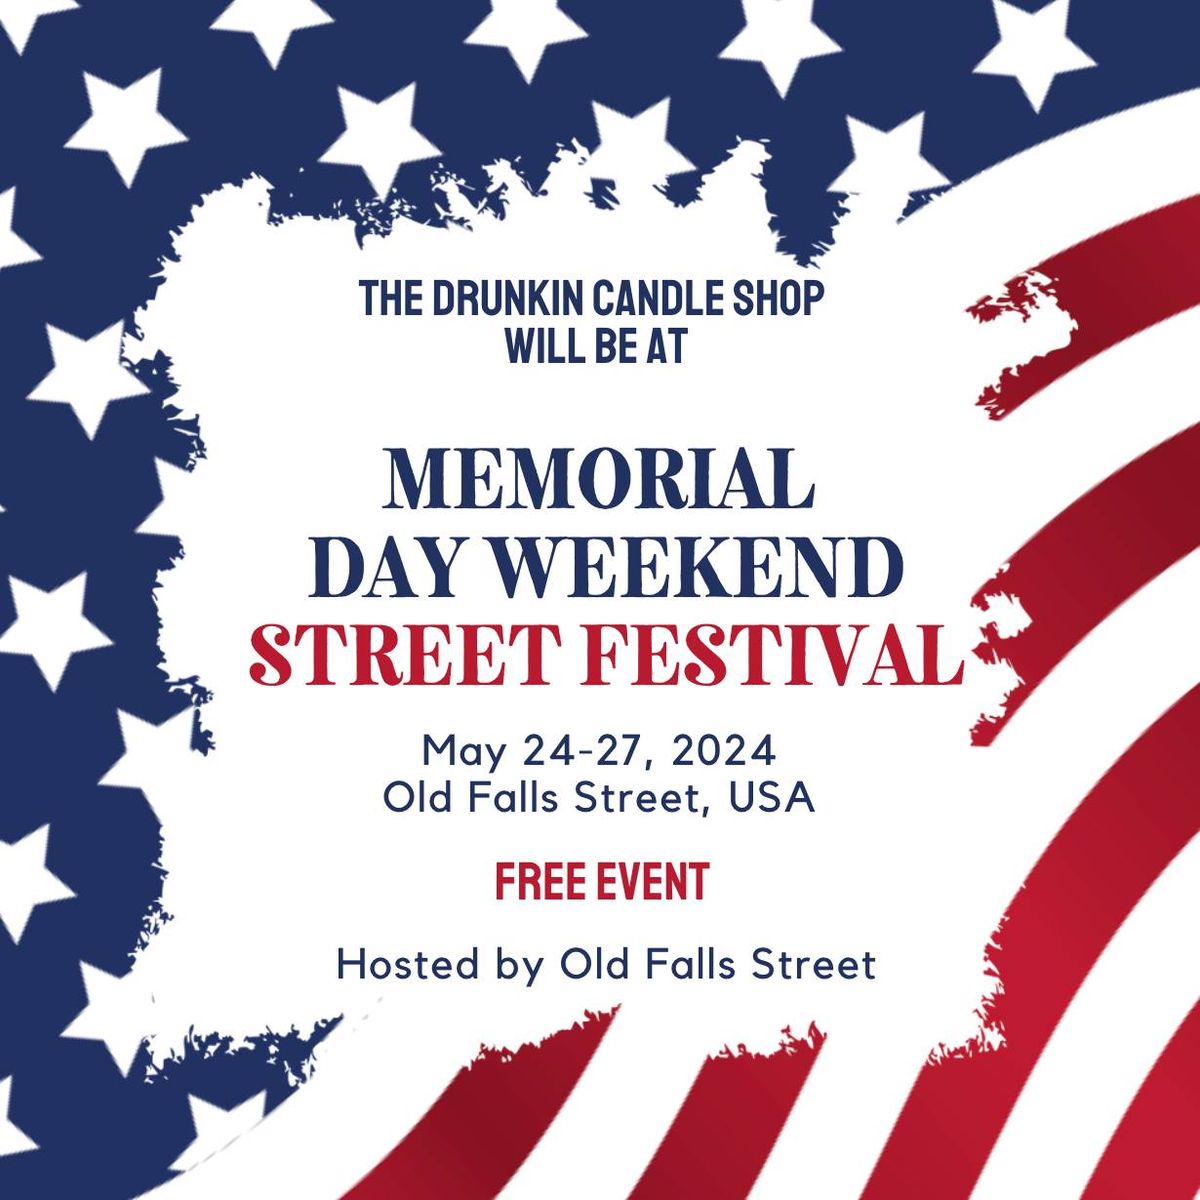 The Drunkin Candle Shop @ Memorial Day Weekend Street Festival 